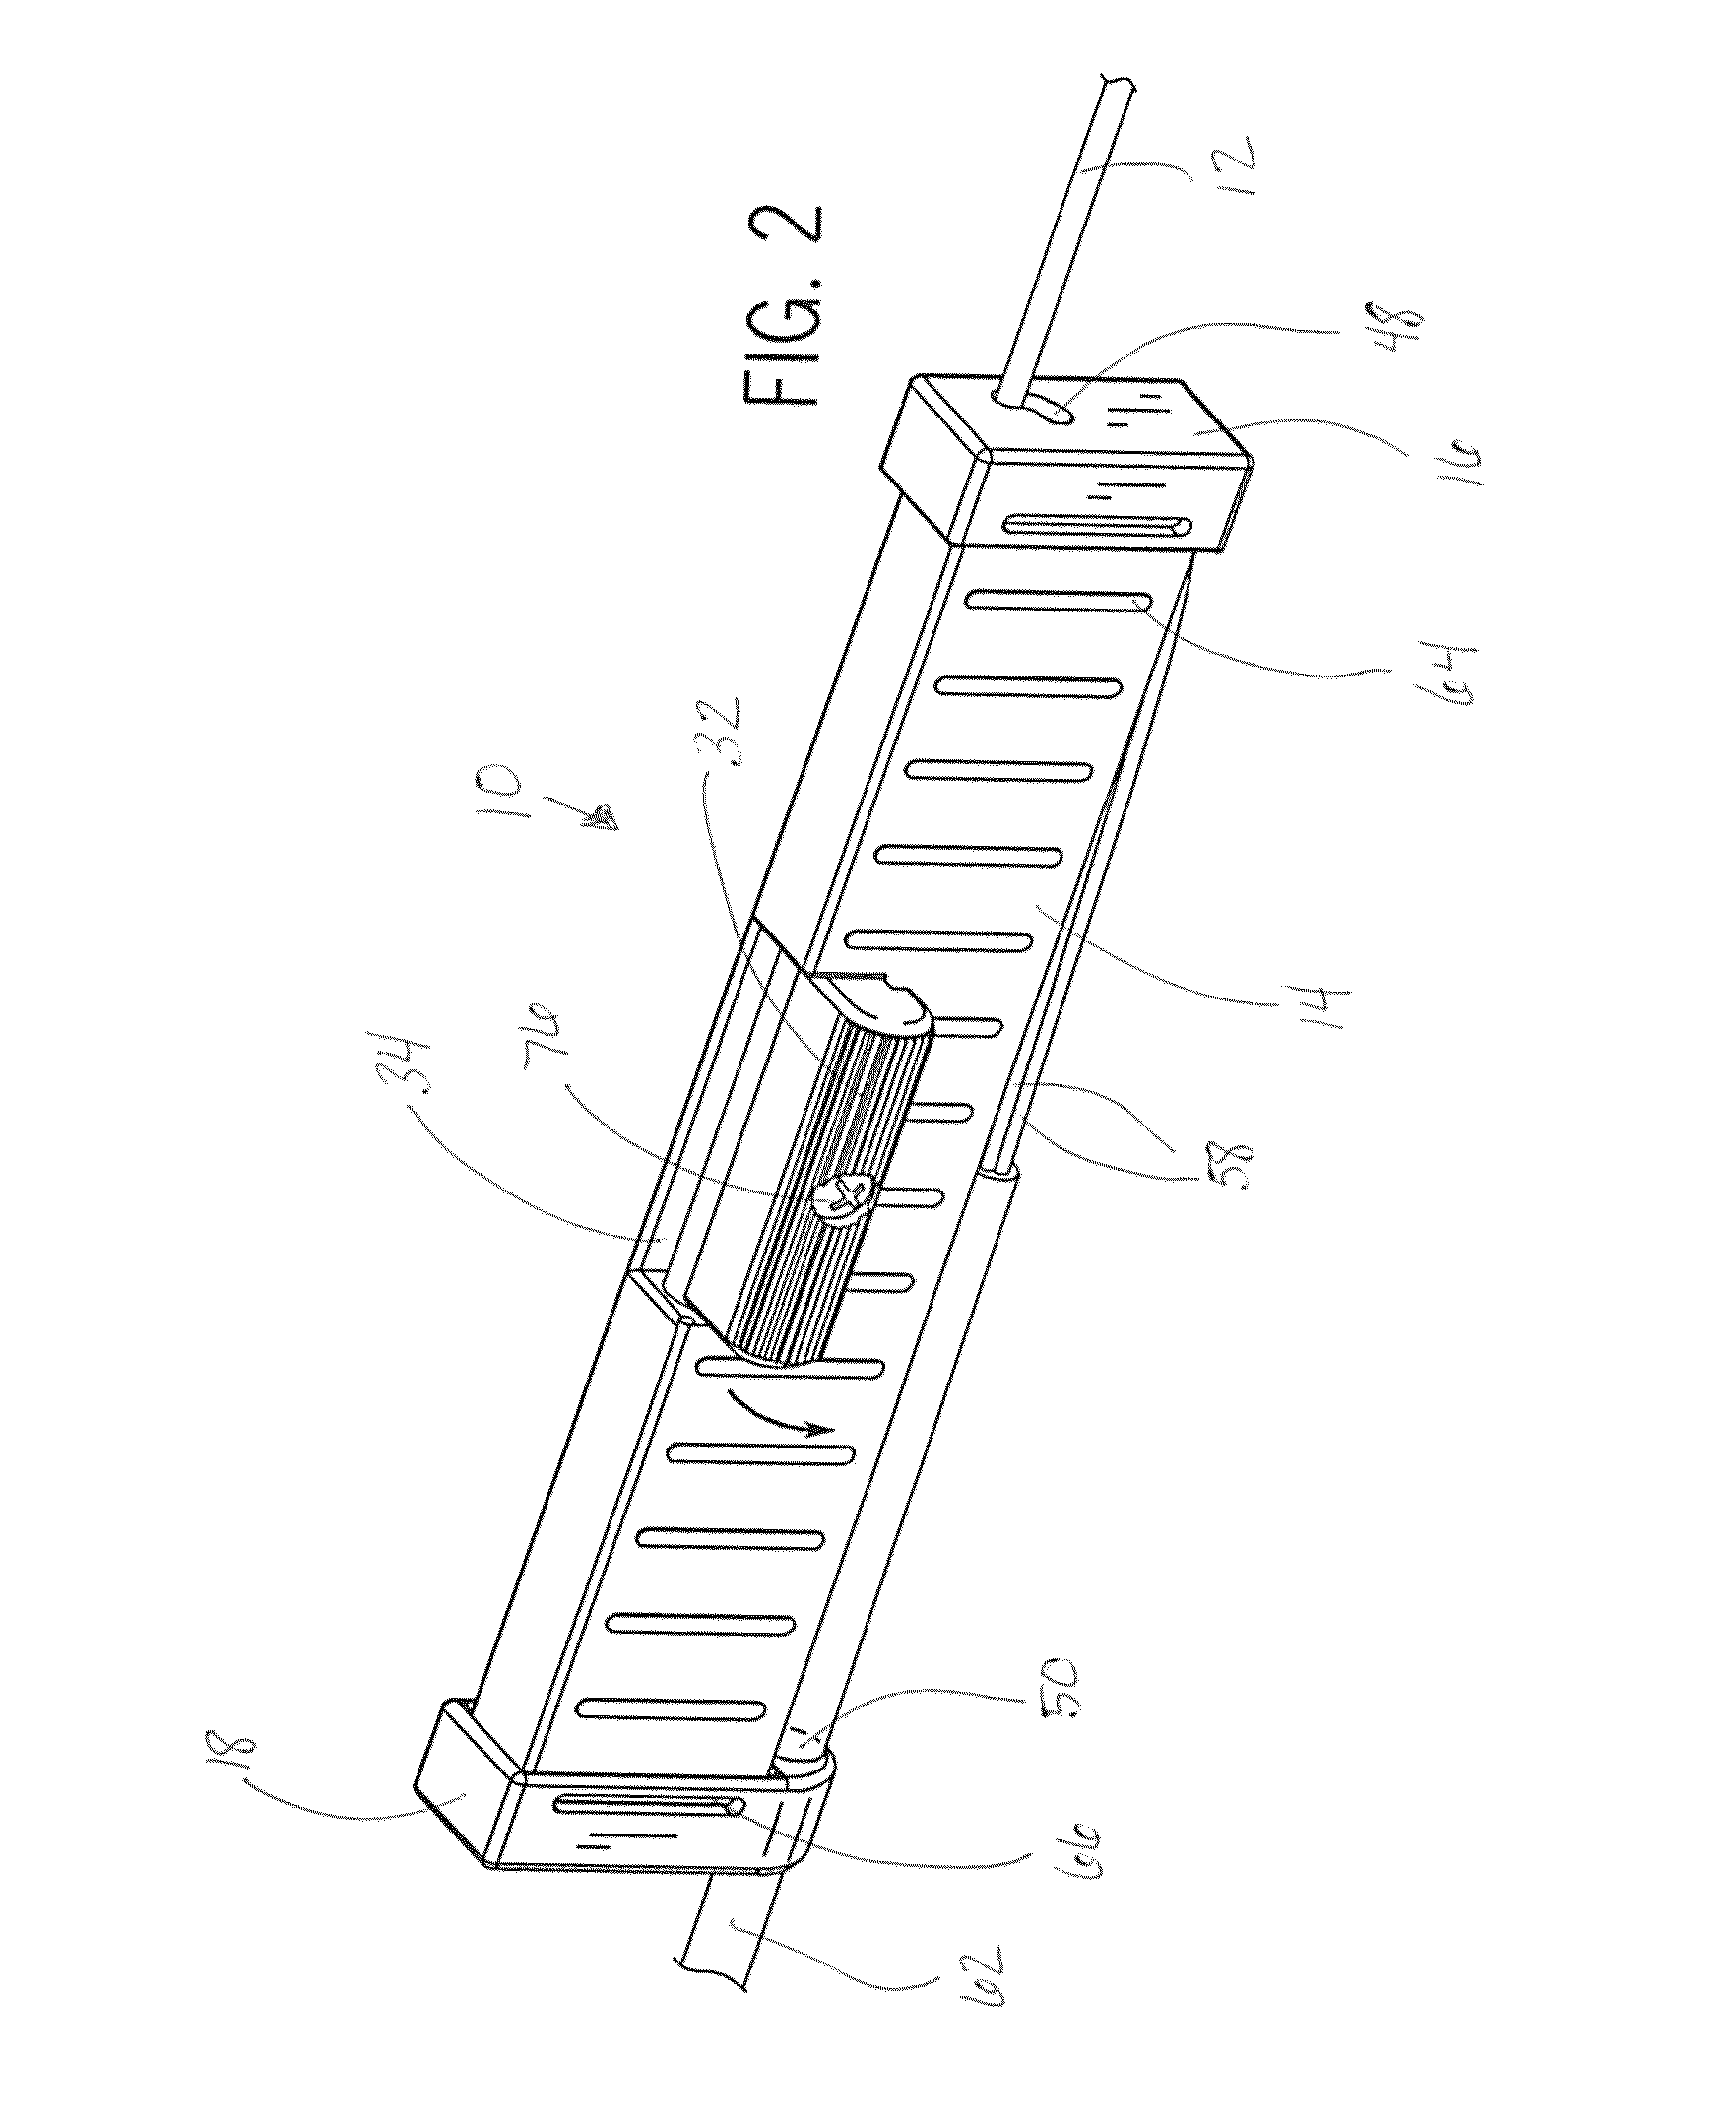 Electrical connector for an in-body multi-contact medical electrode device